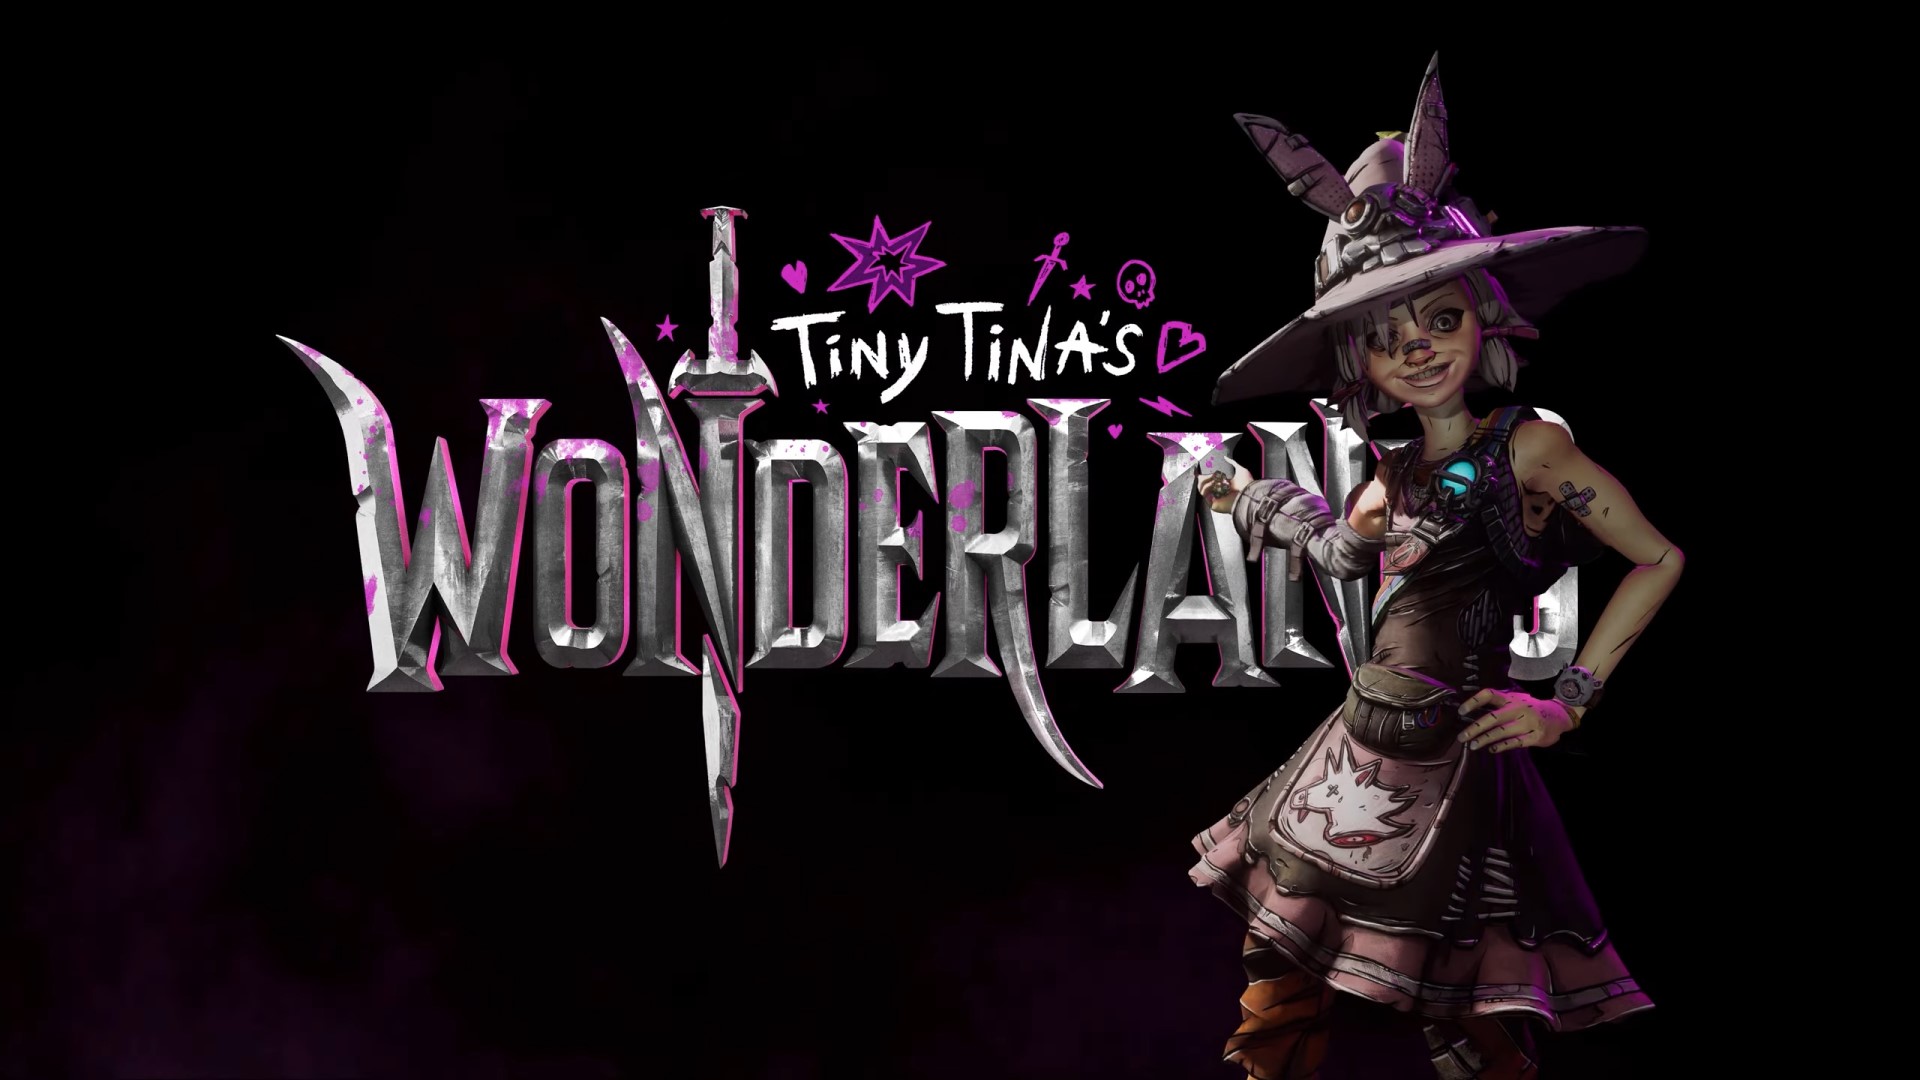 Tiny Tina’s Wonderlands has been revealed at Summer Game Fest